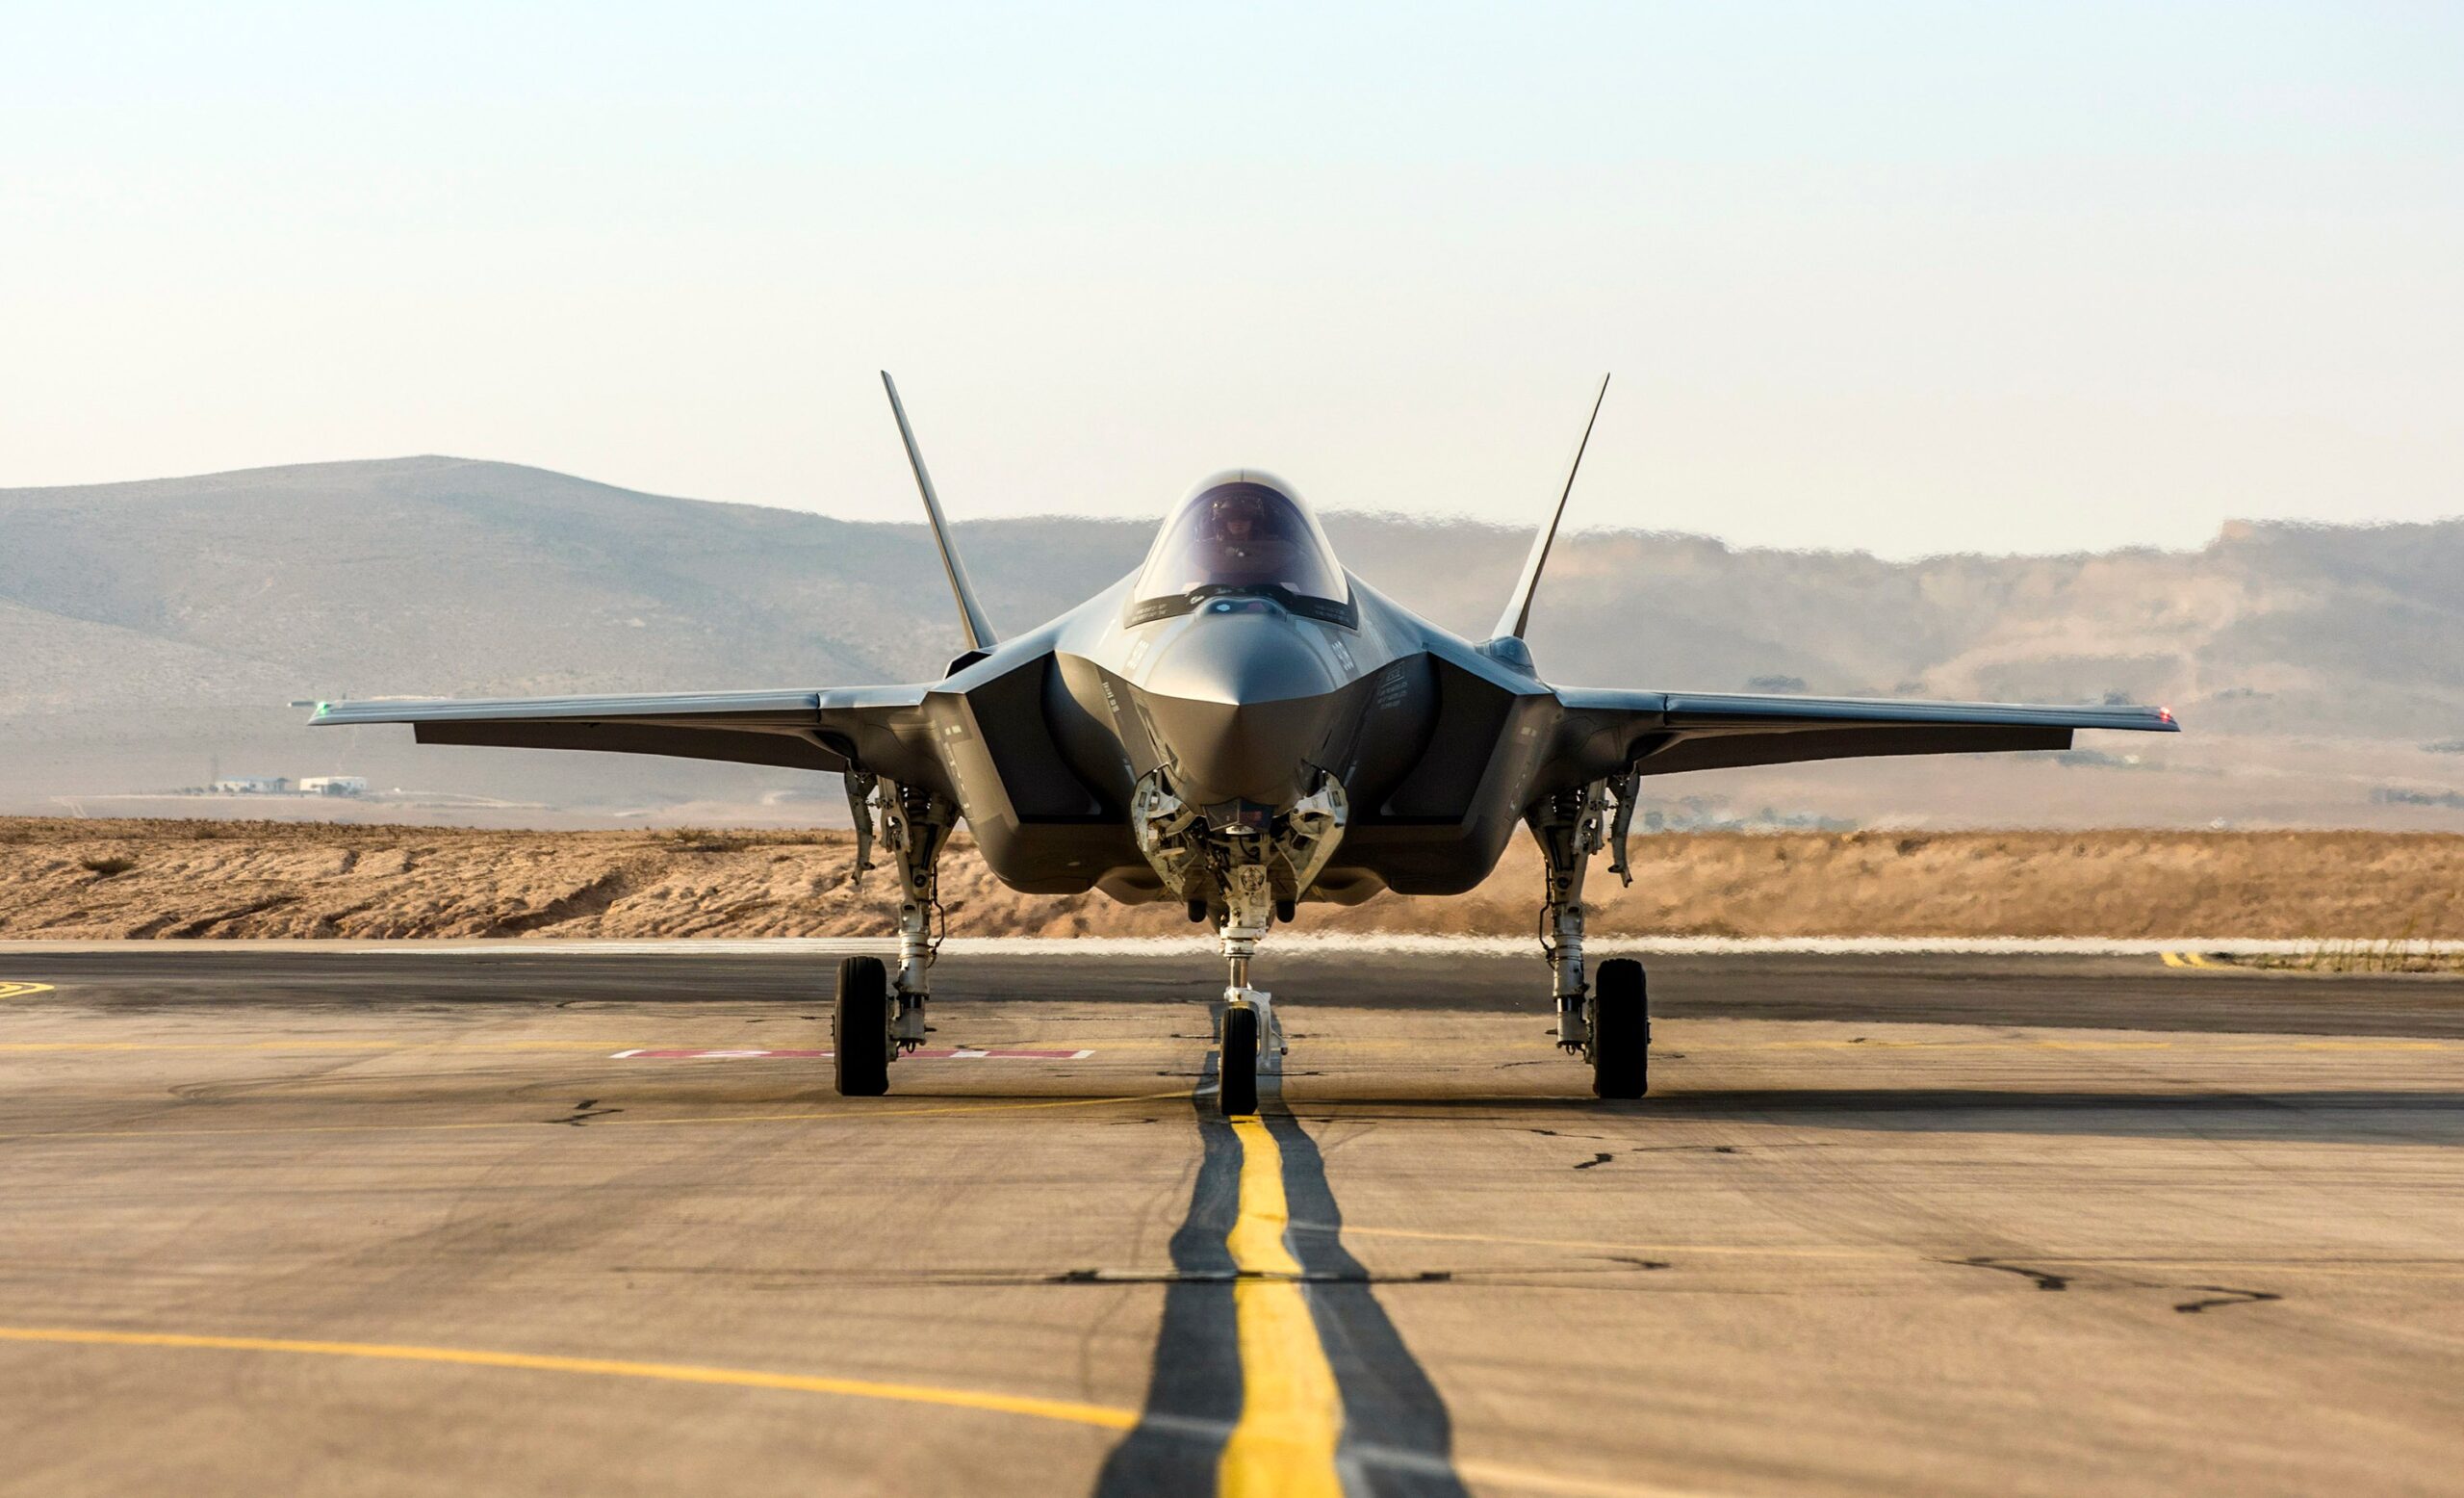 ALIS Working Better, But F-35 Full-Rate Date Still Unclear